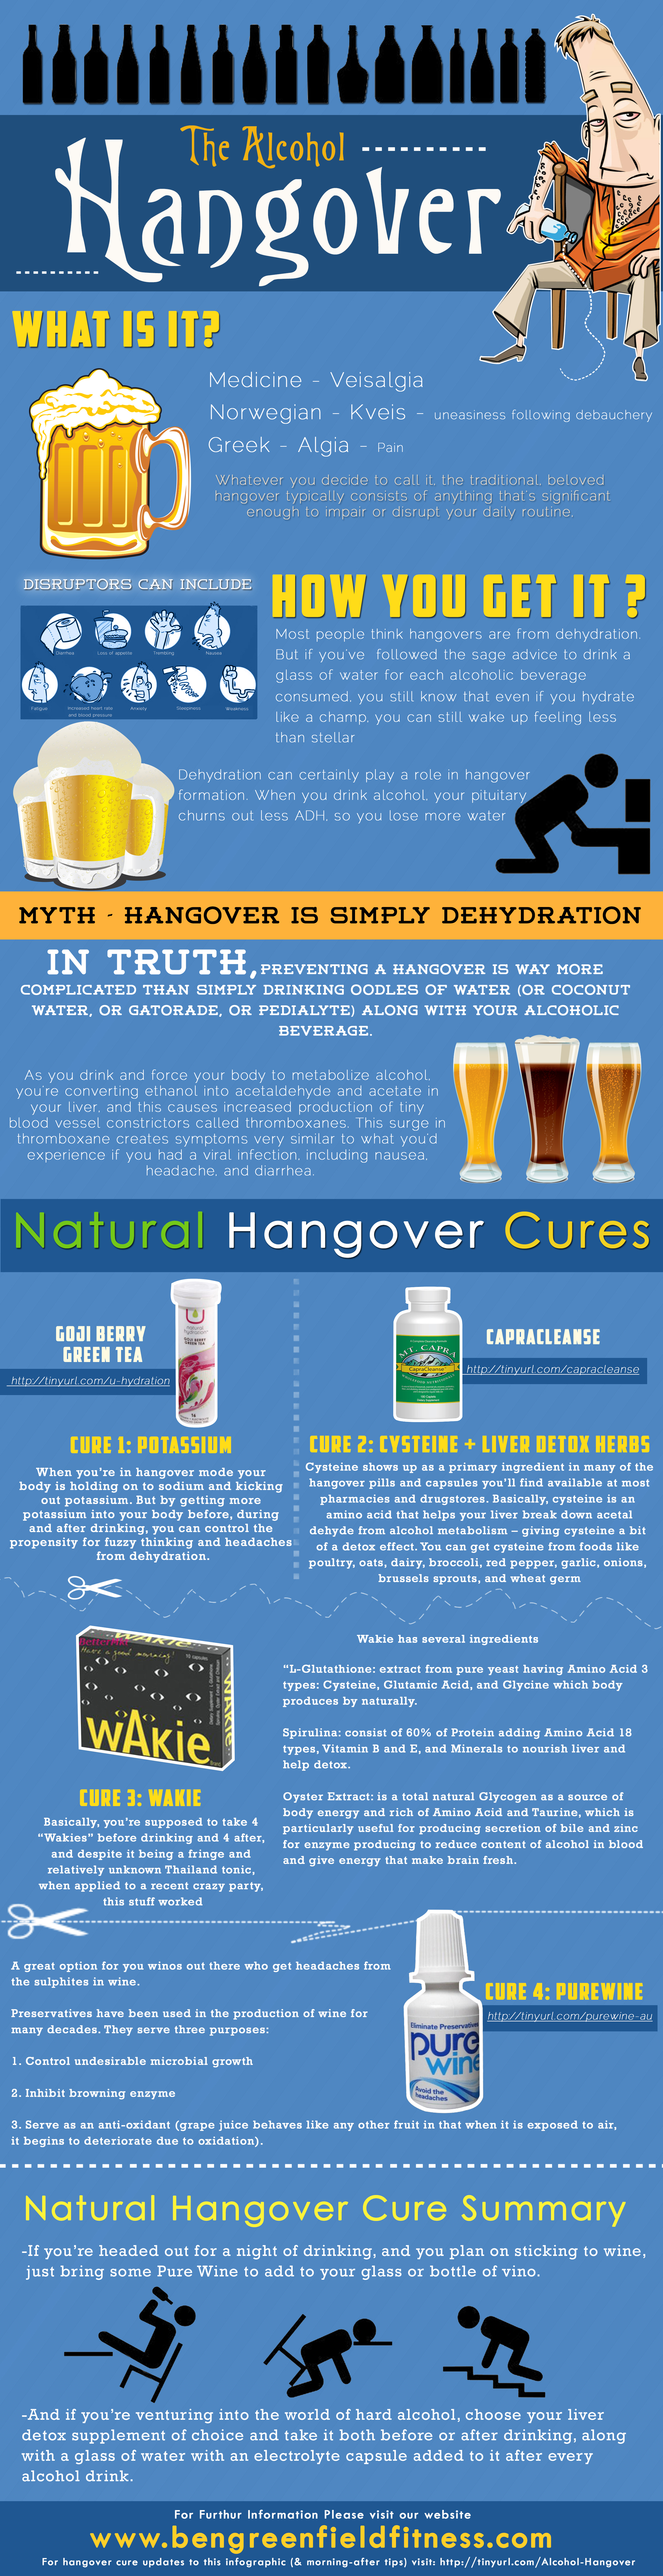 Natural Hangover Cures